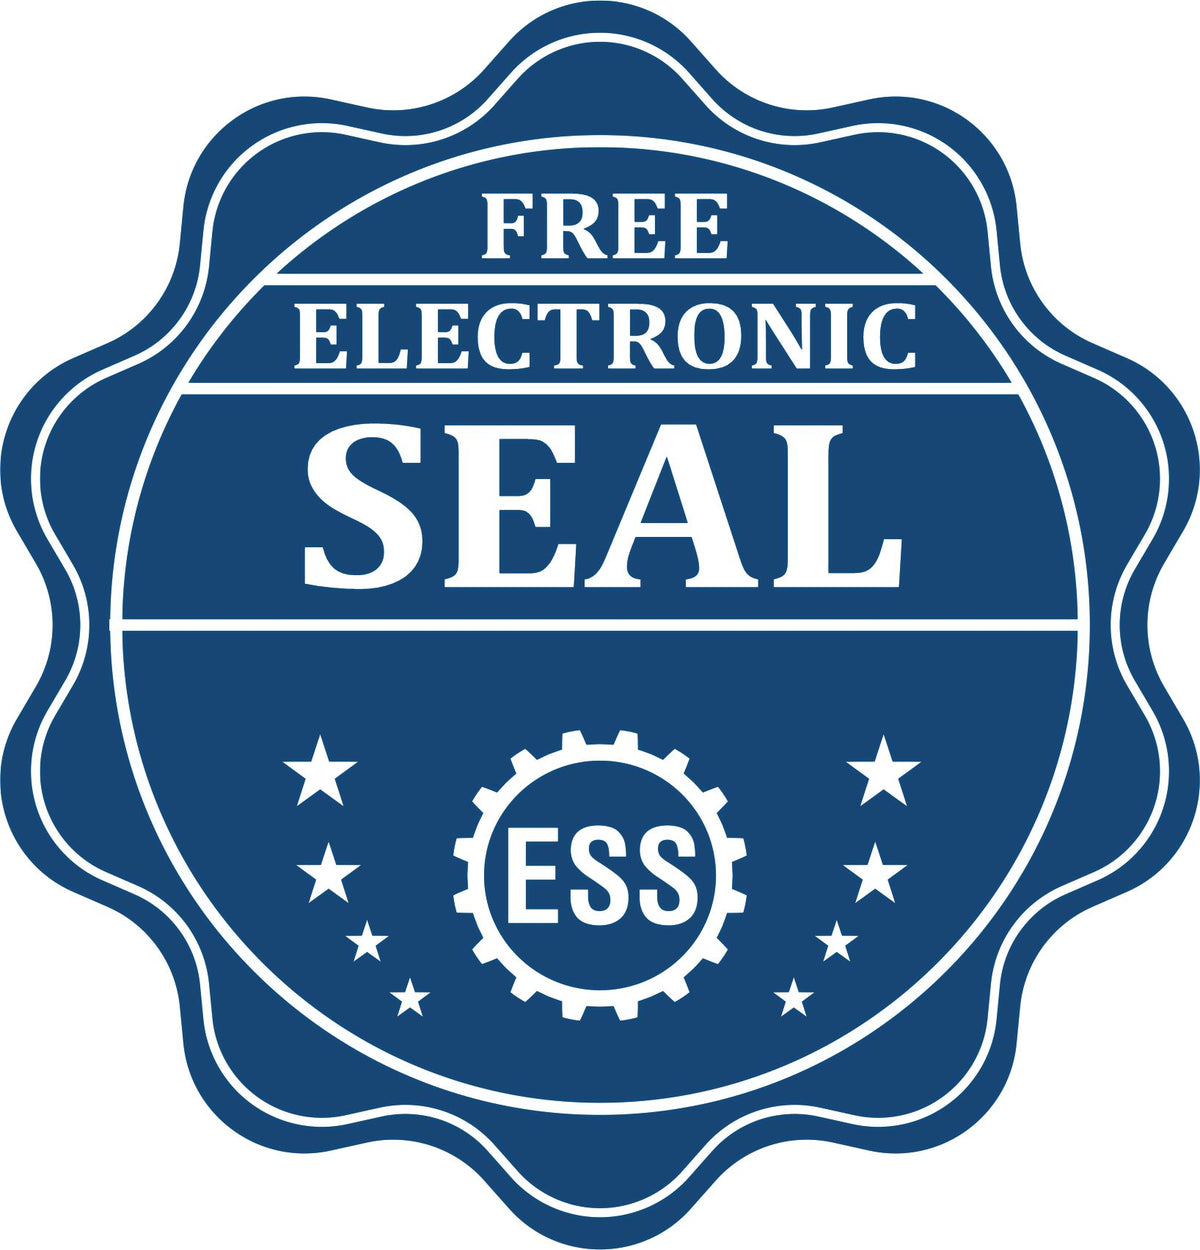 A badge showing a free electronic seal for the Hybrid Wyoming Engineer Seal with stars and the ESS gear on the emblem.